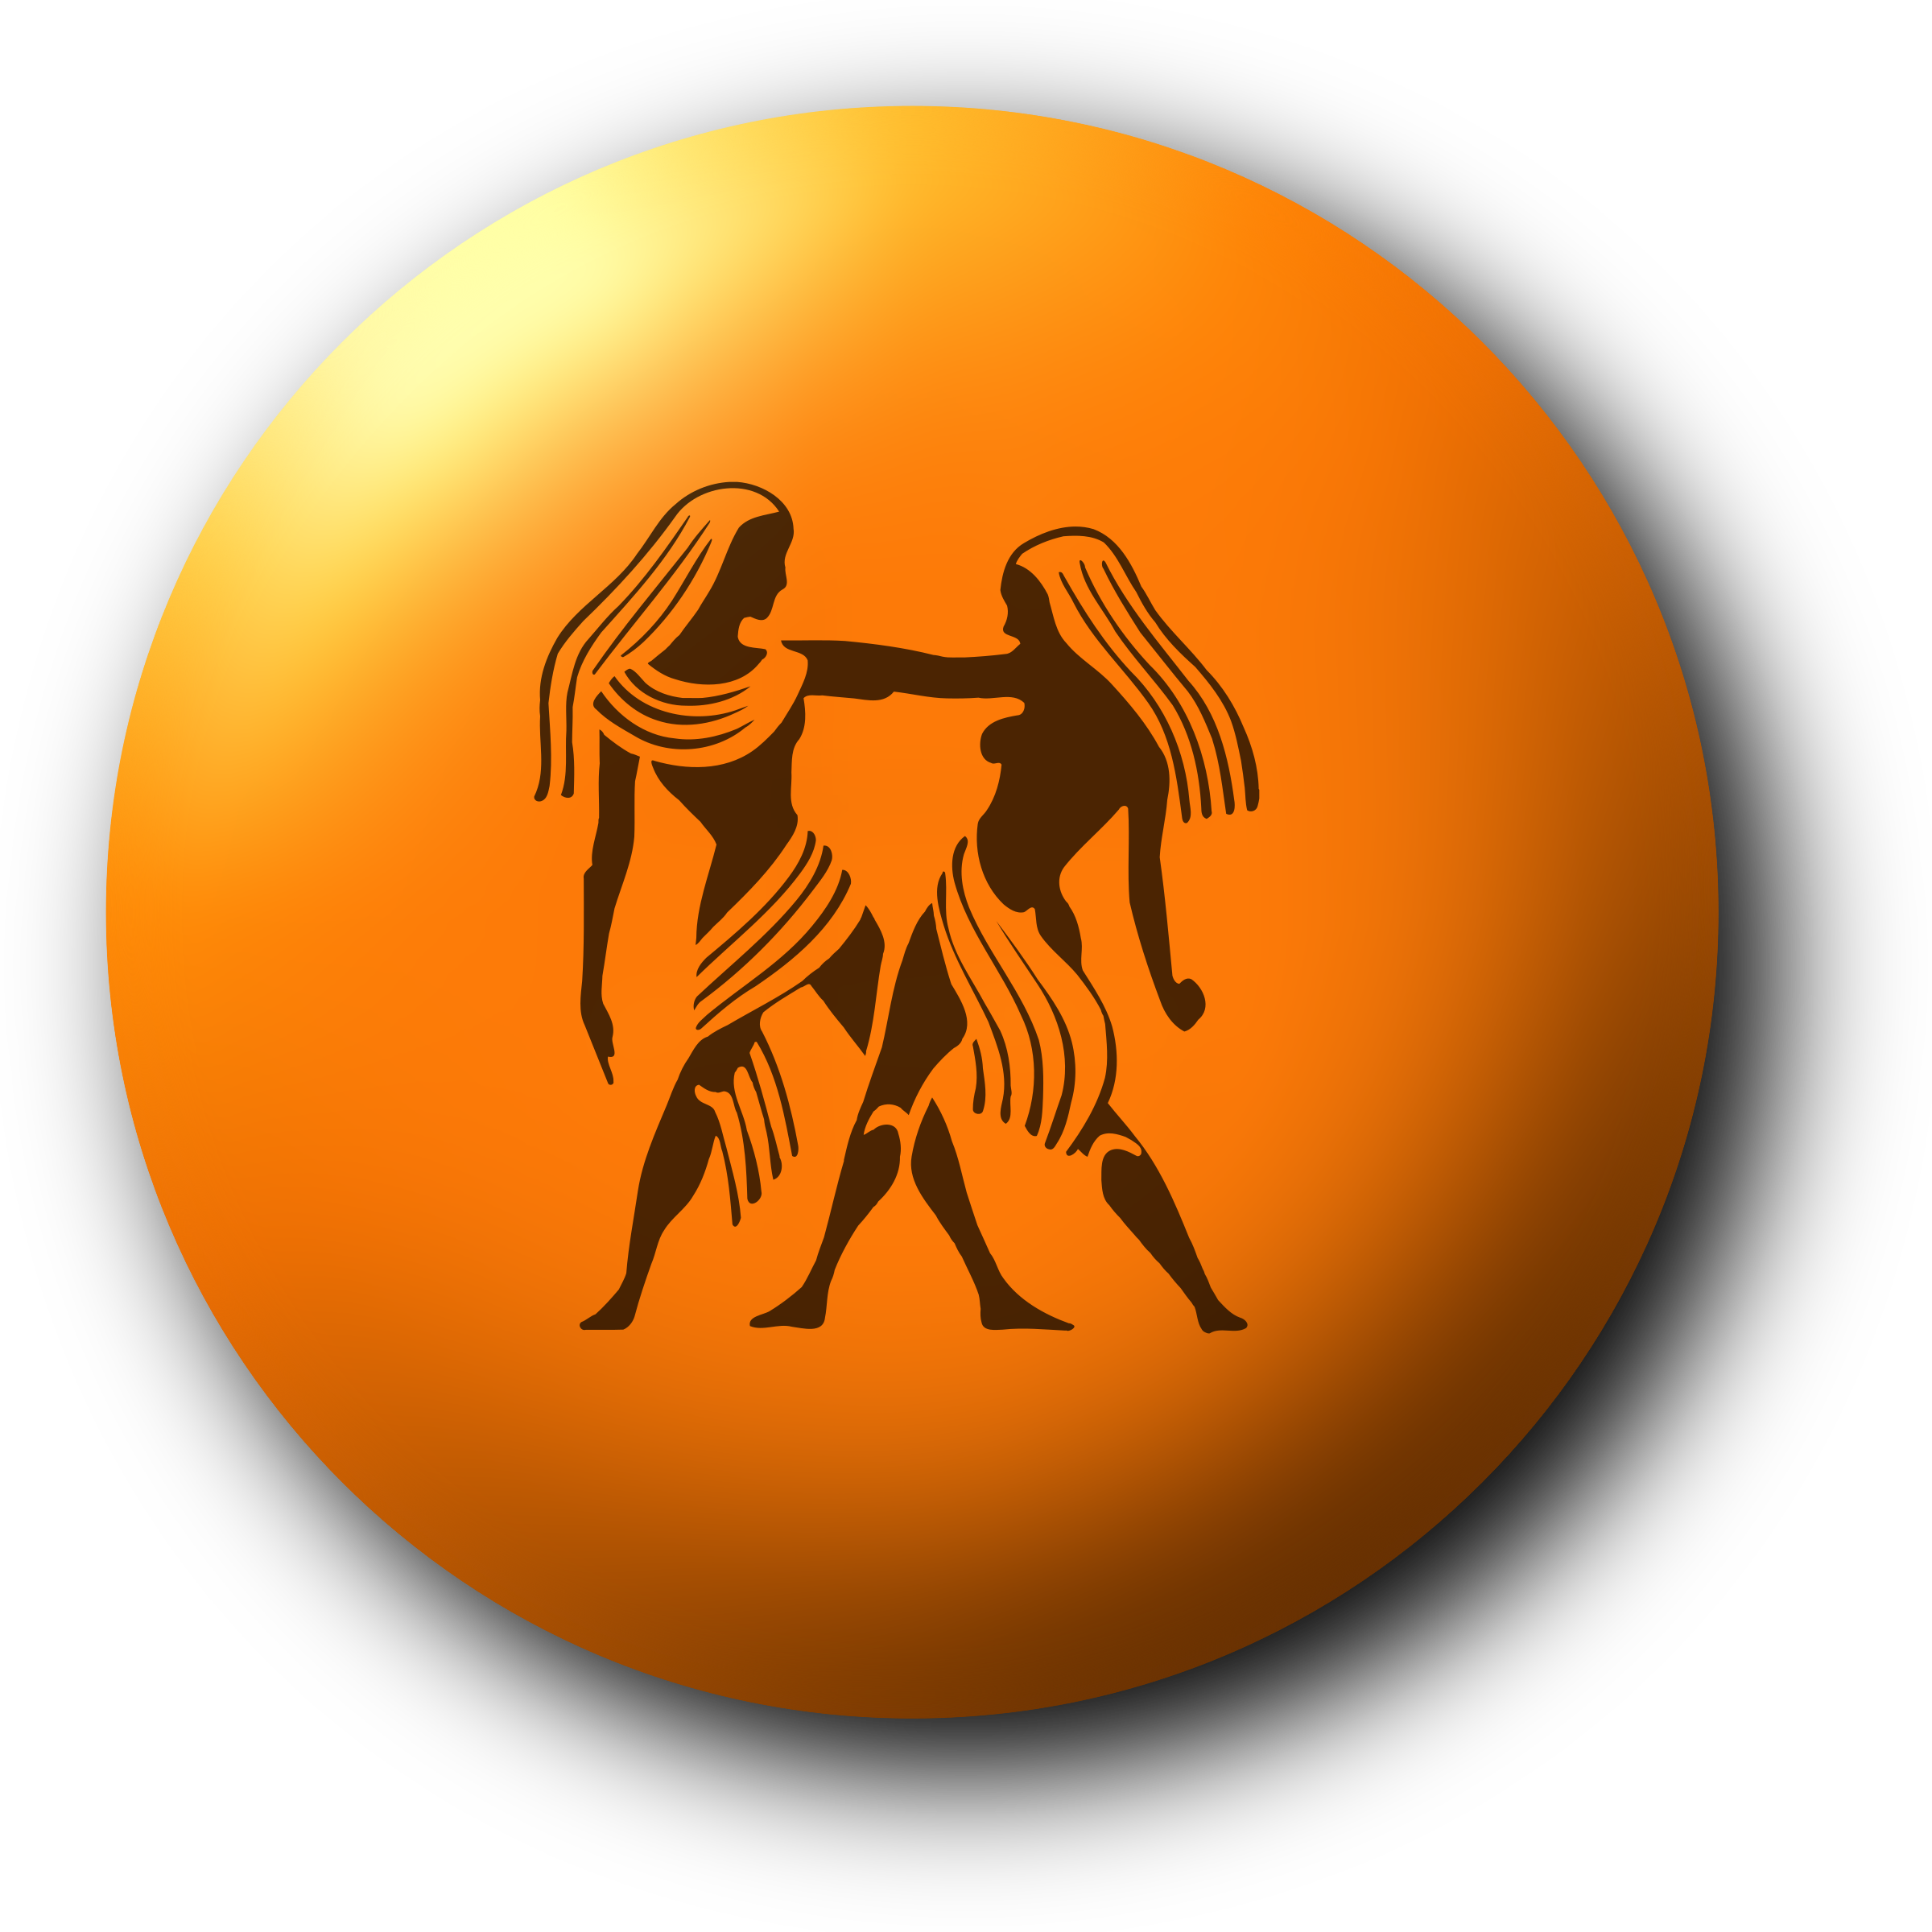 A Black And Orange Circle With Two Women Dancing